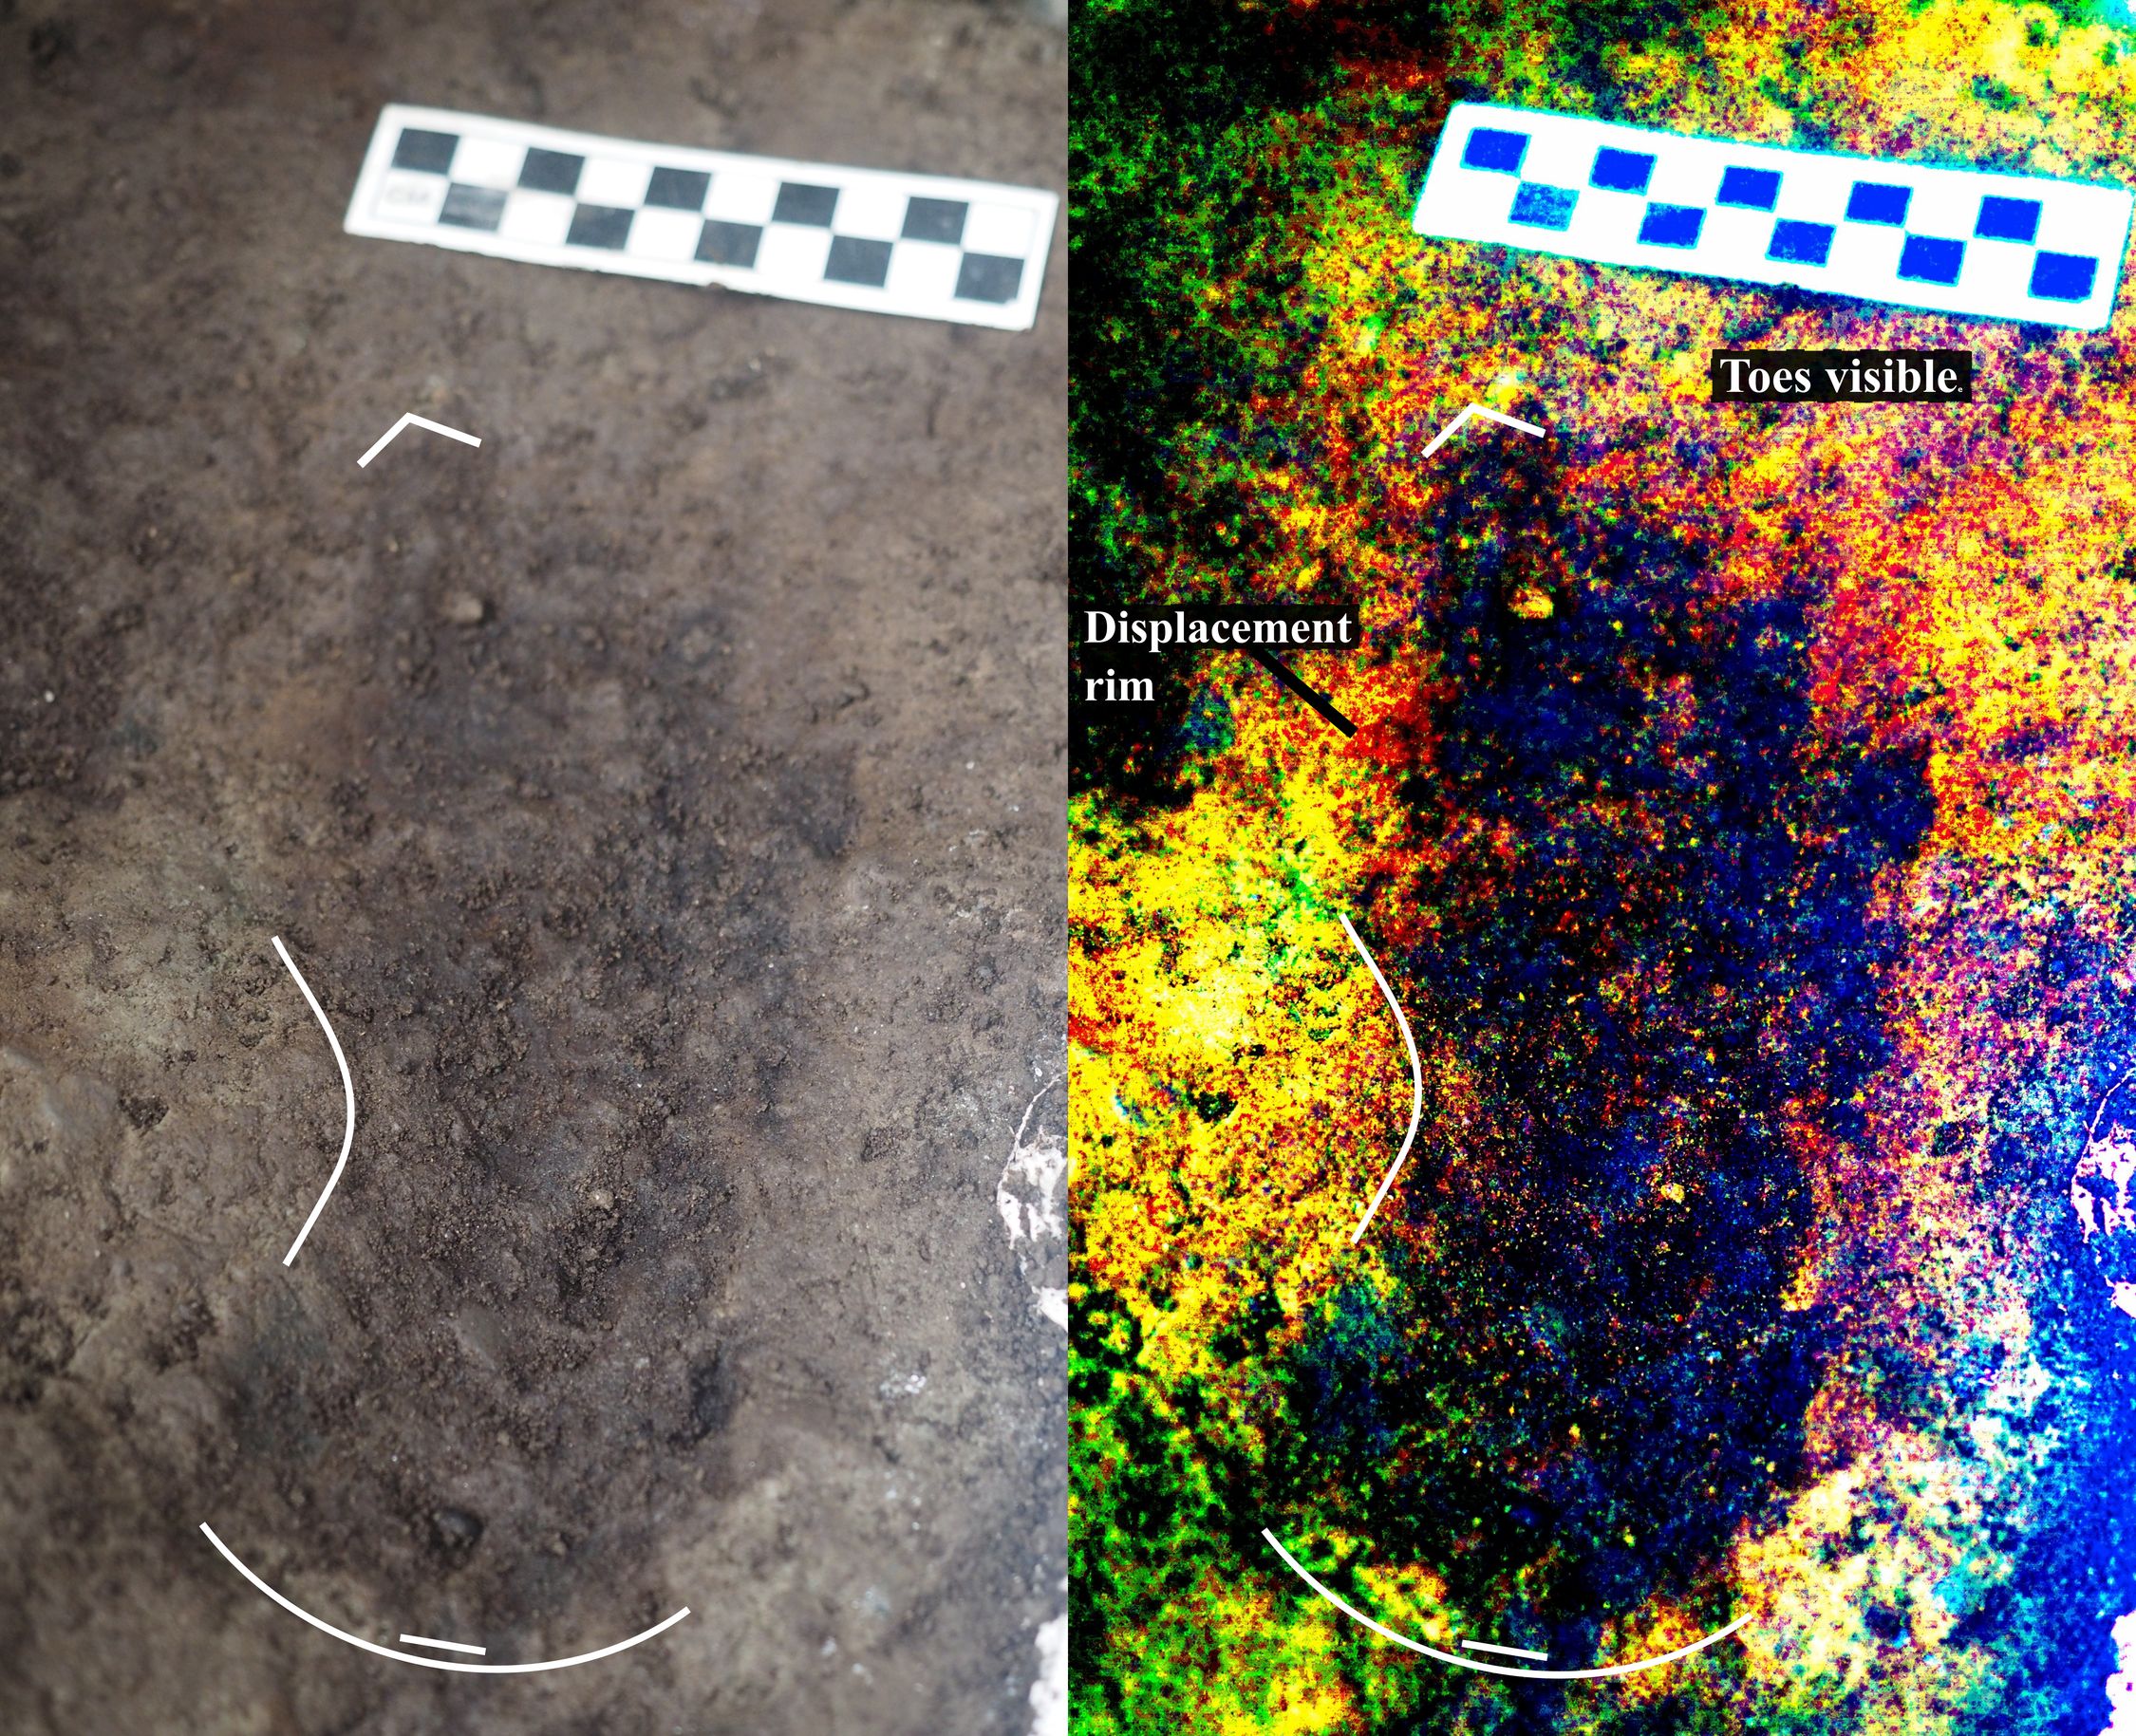 Archaeologists Discover 29 Human Footprints From The Last Ice Age